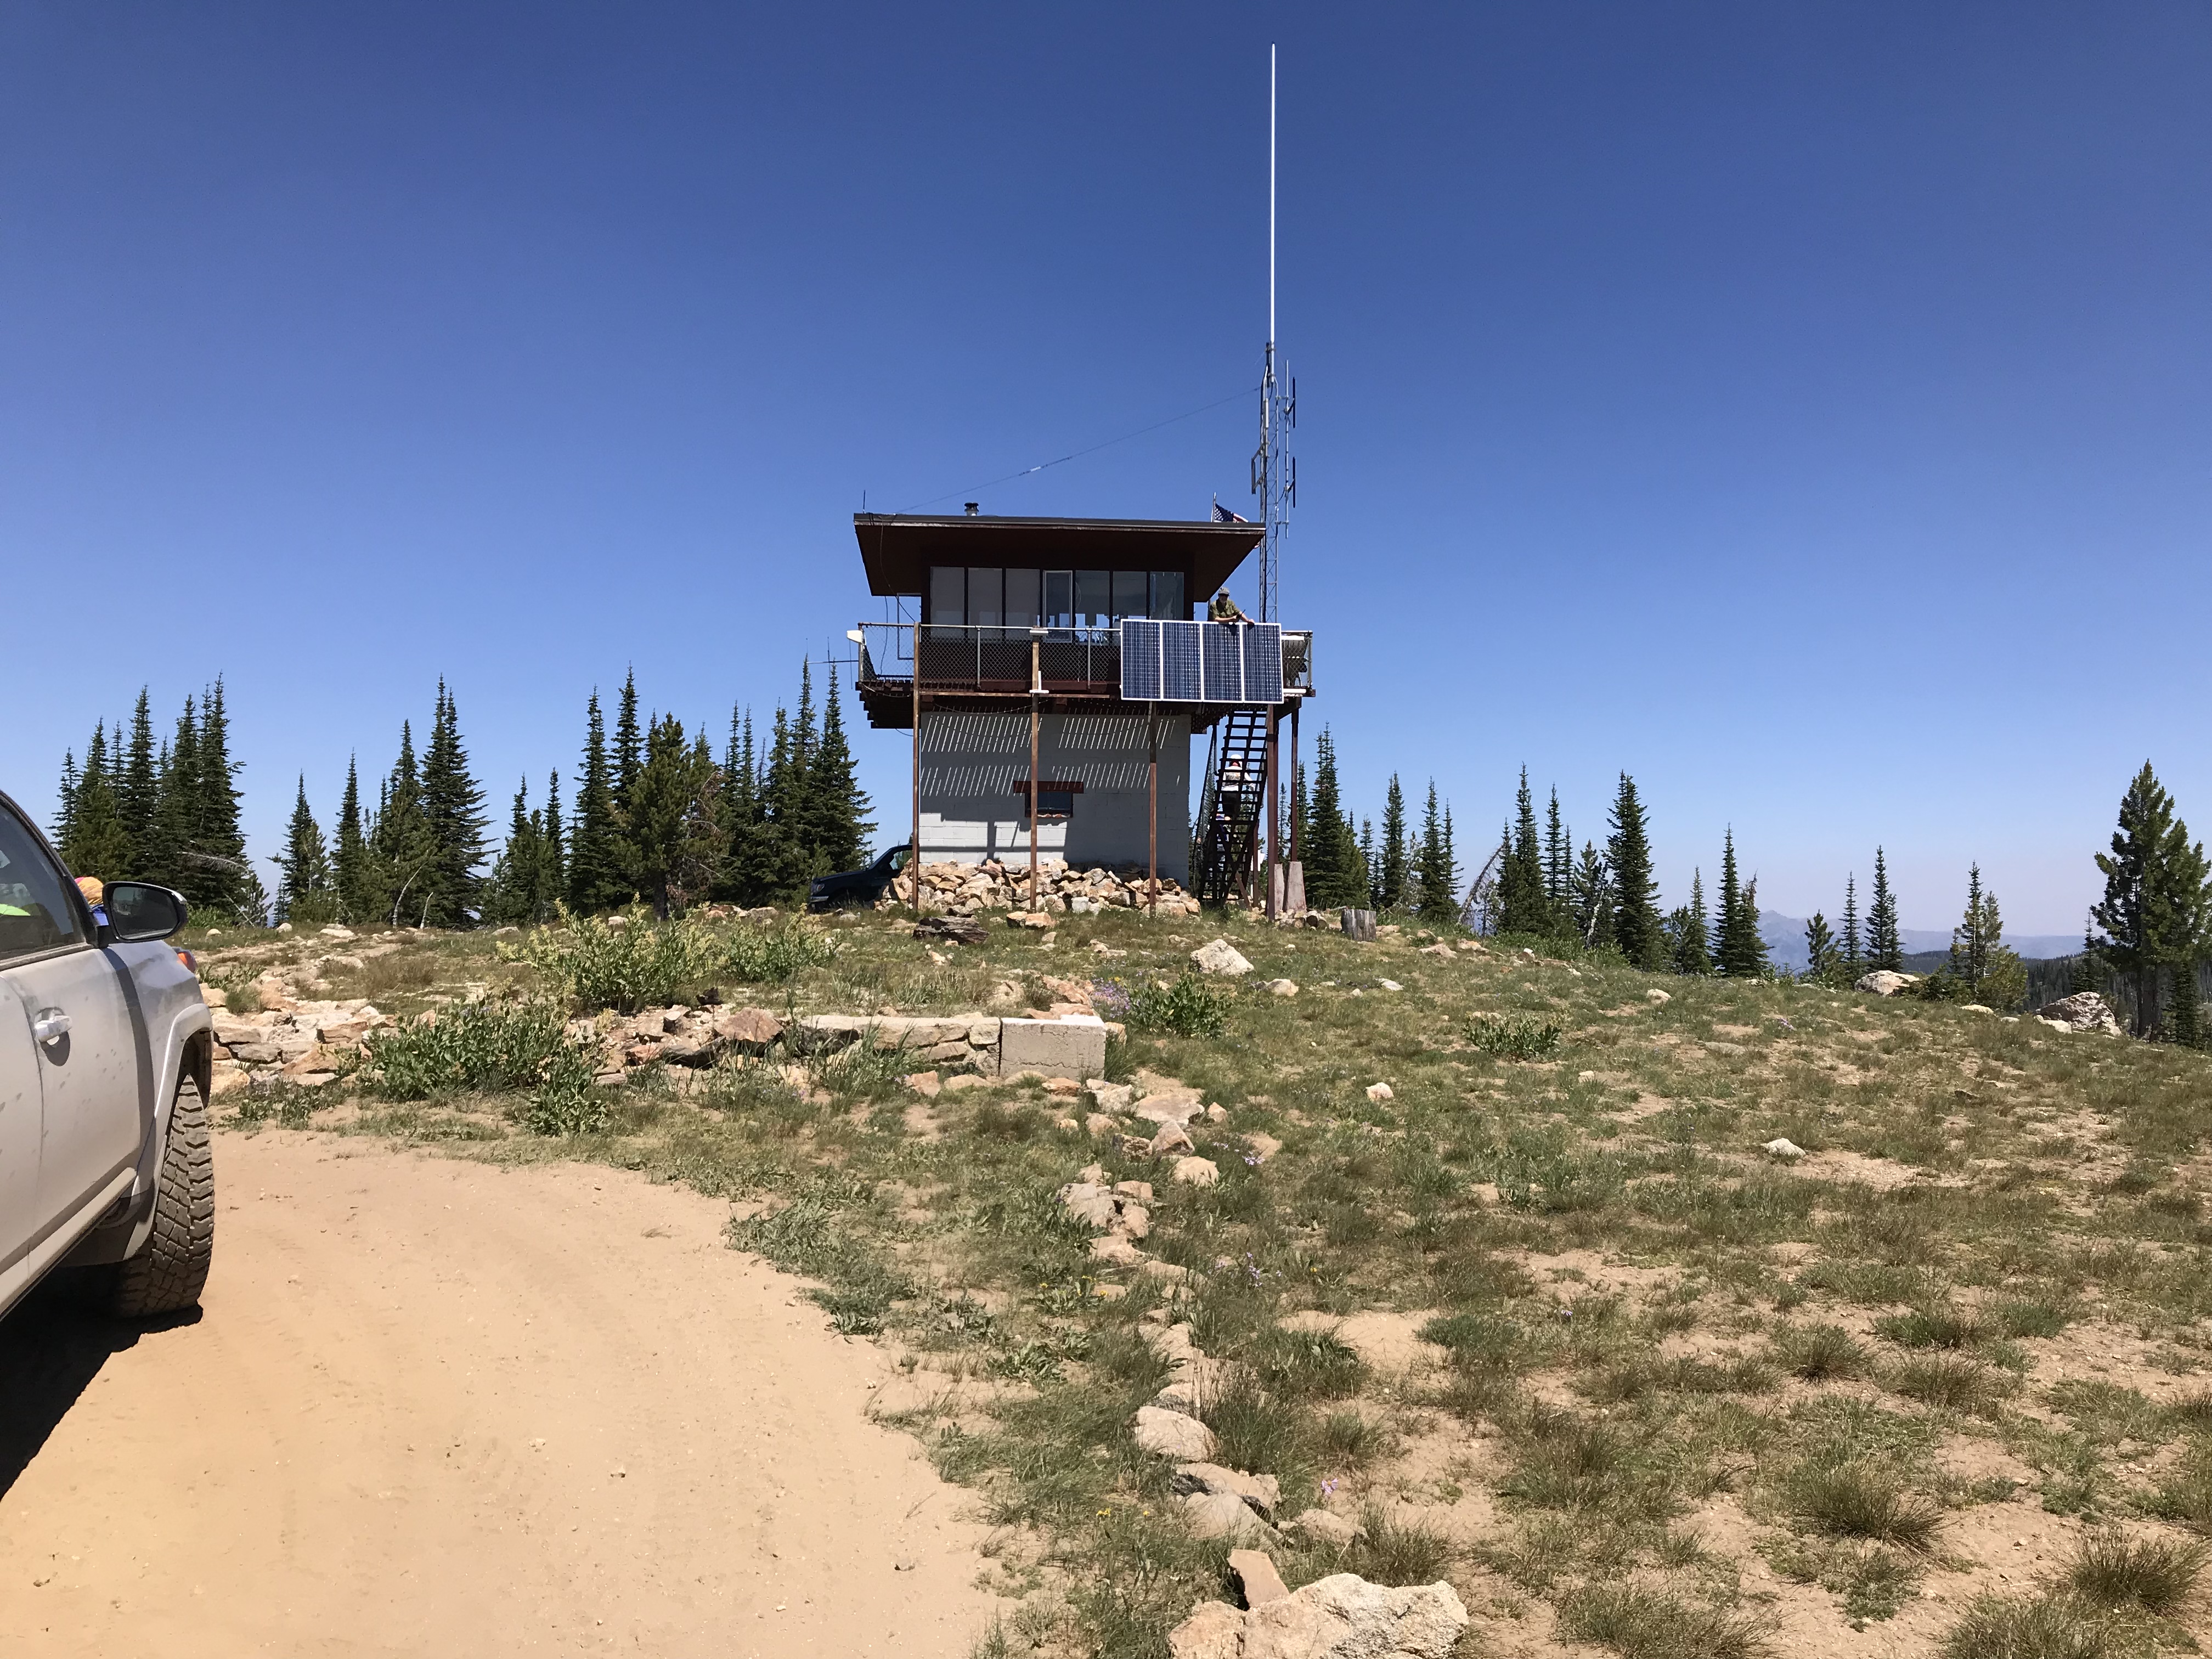 The fire lookout is one of three manned lookouts in the northwest corner of the Salmon River Mountains.